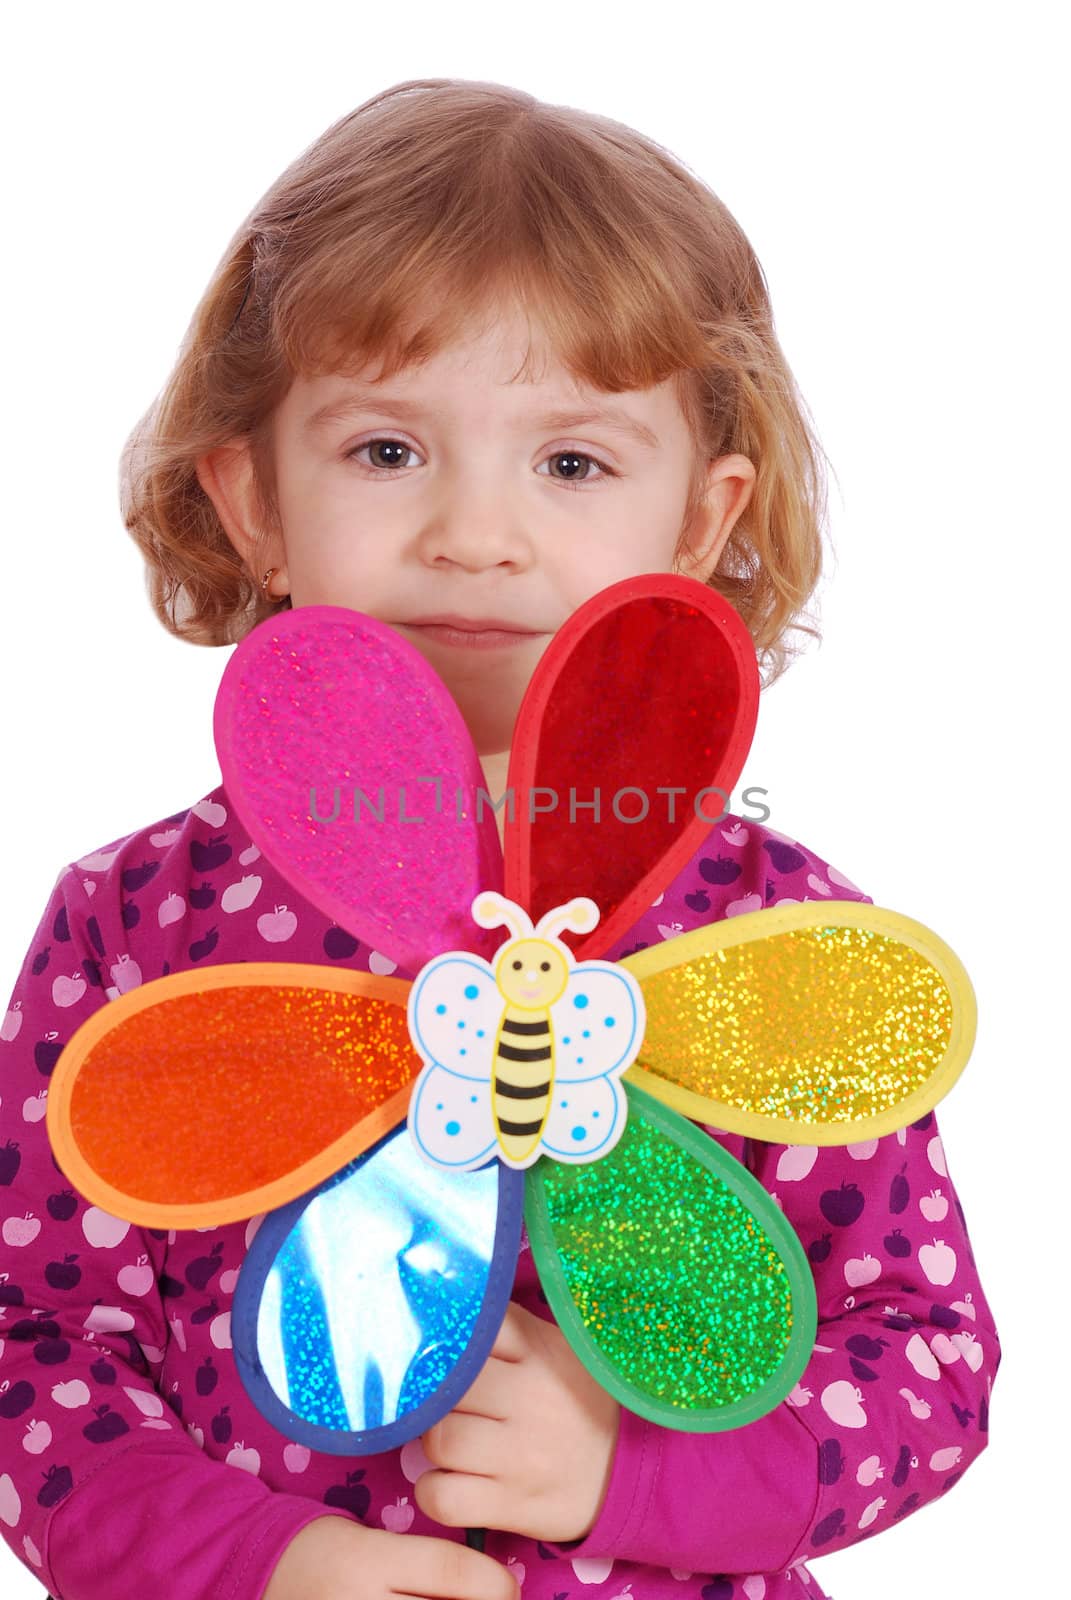 Little girl with toy studio shot